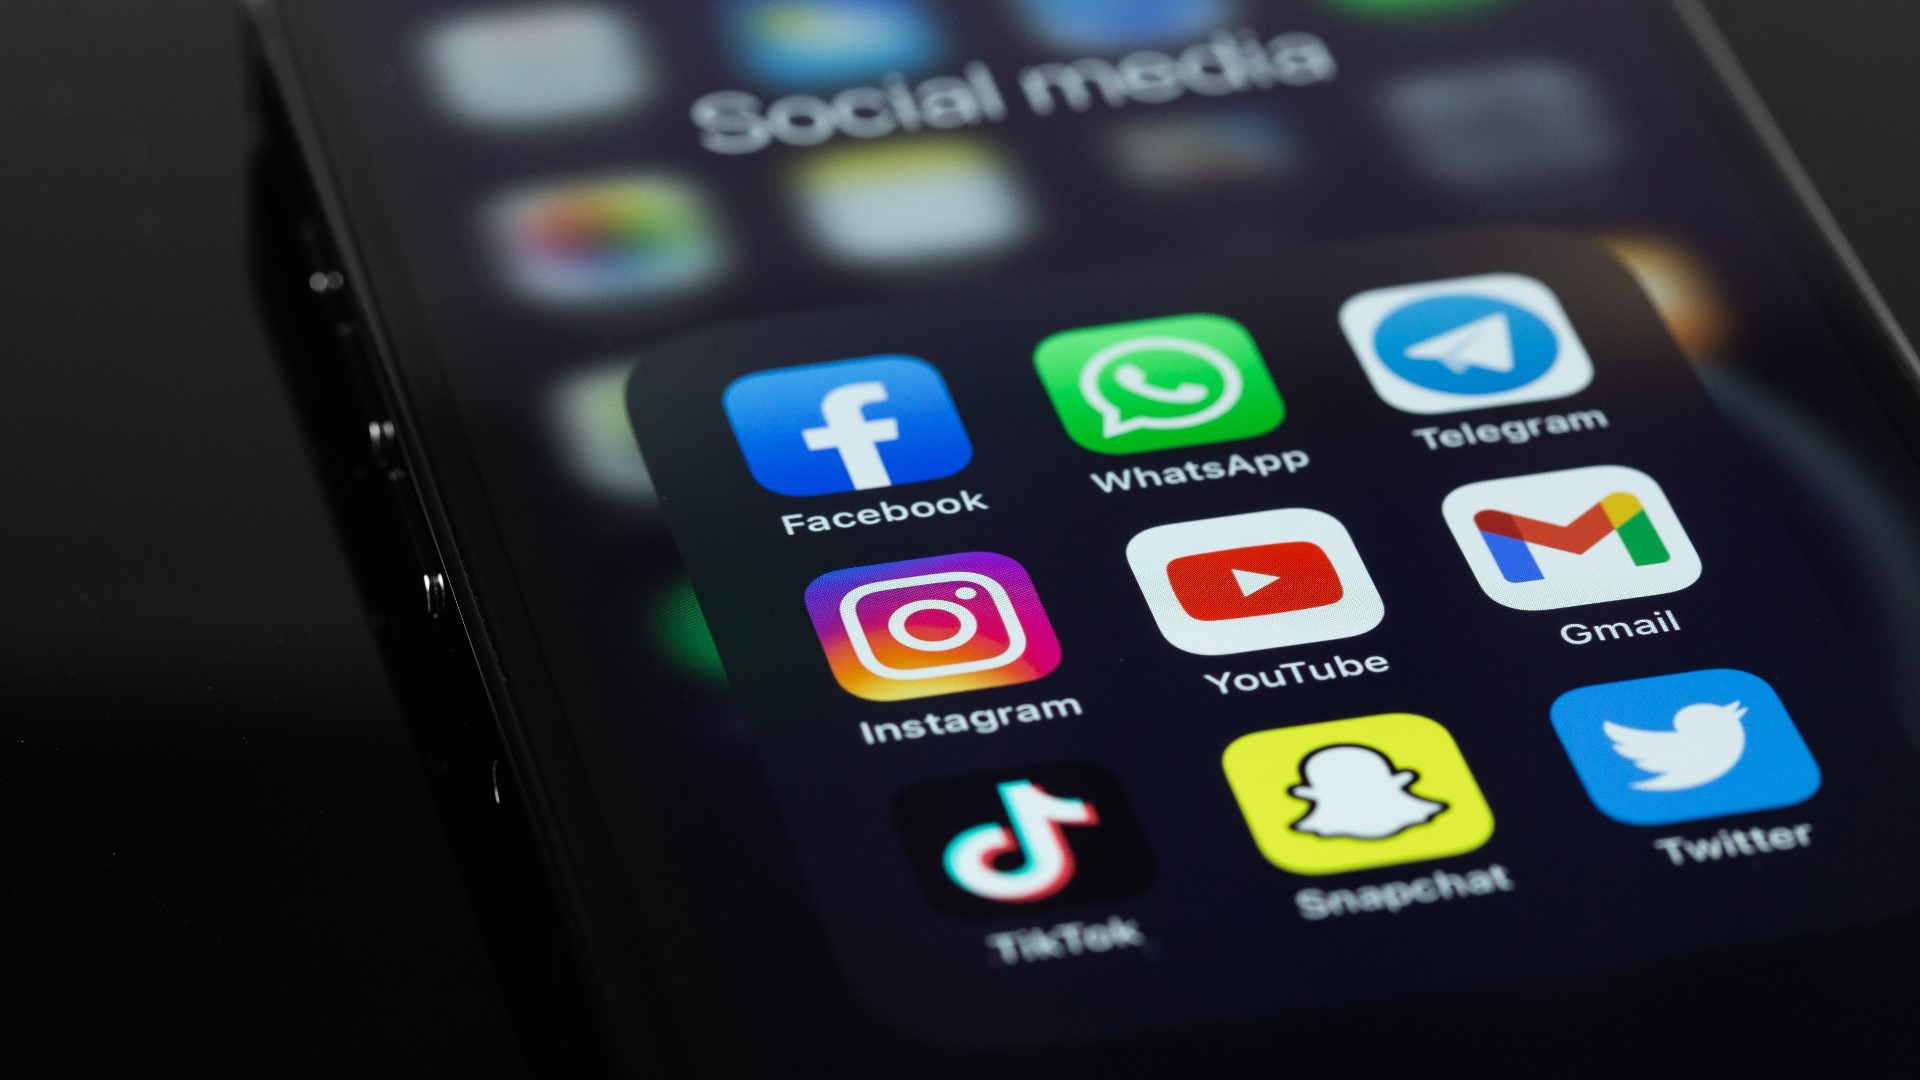 The act would put parental restrictions in place for any adolescent under the age of 16 wanting to use social media or online gaming platforms.